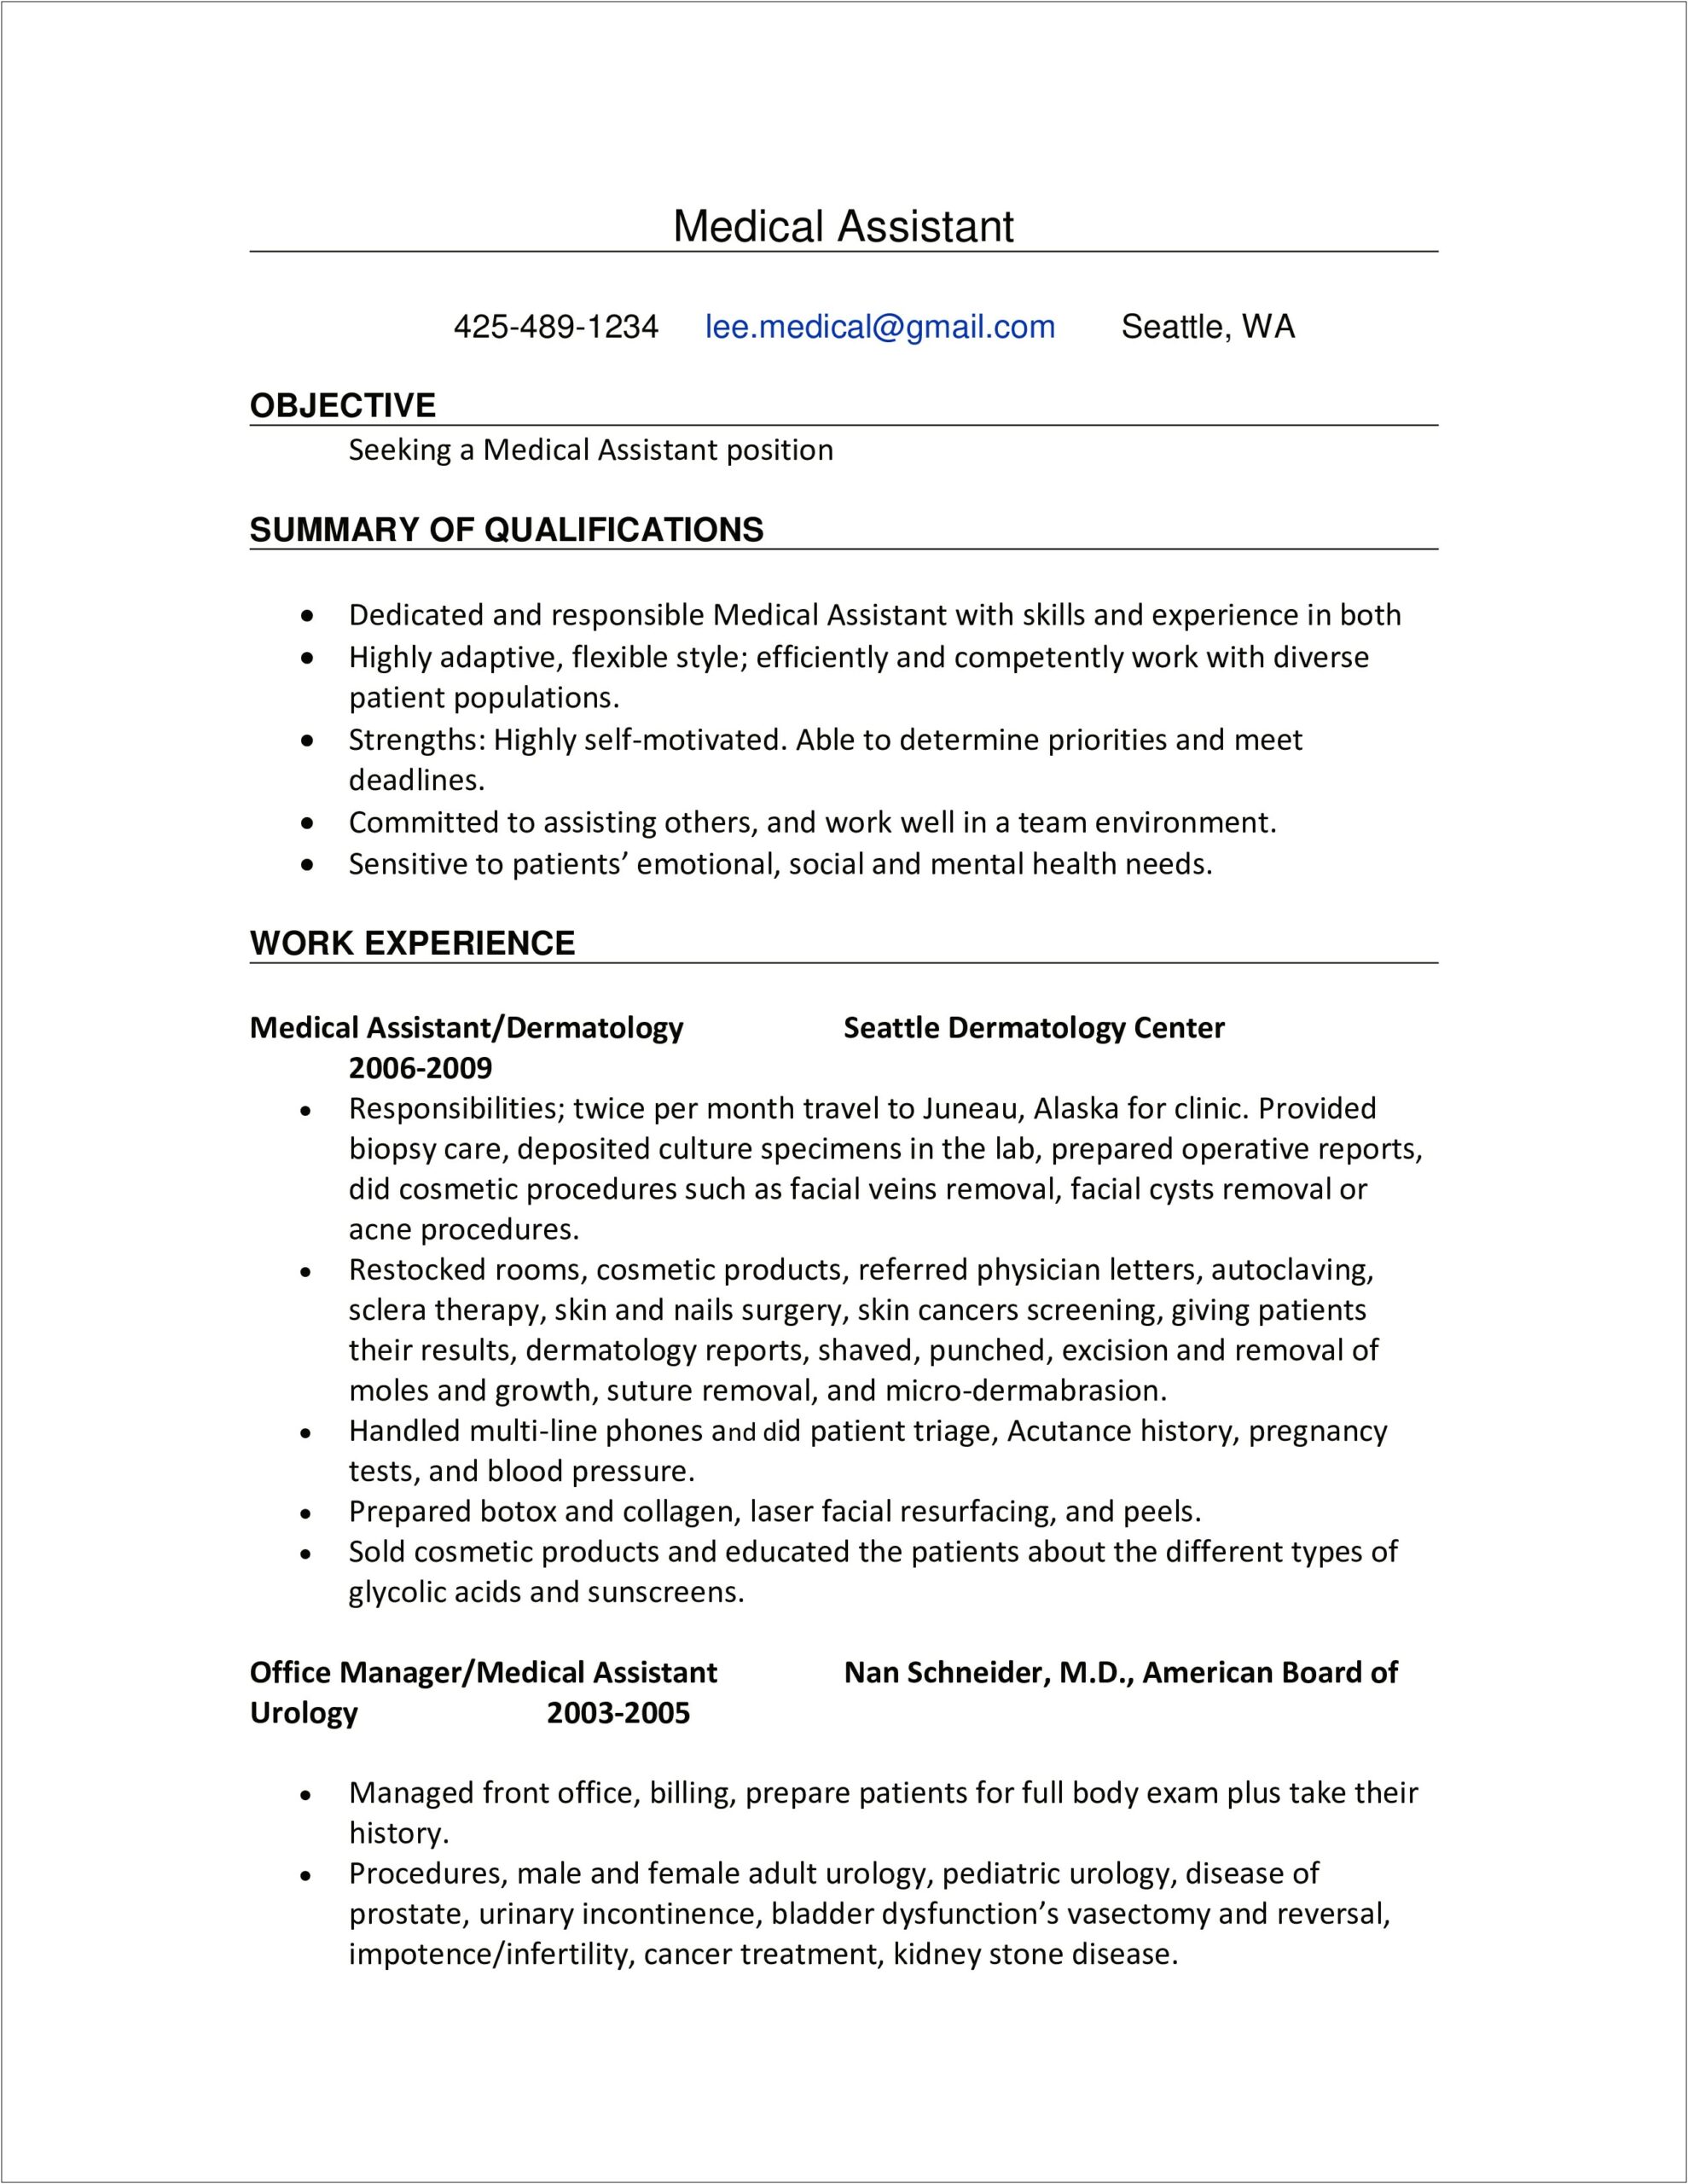 Medical Assistant Objective Statement For Resume